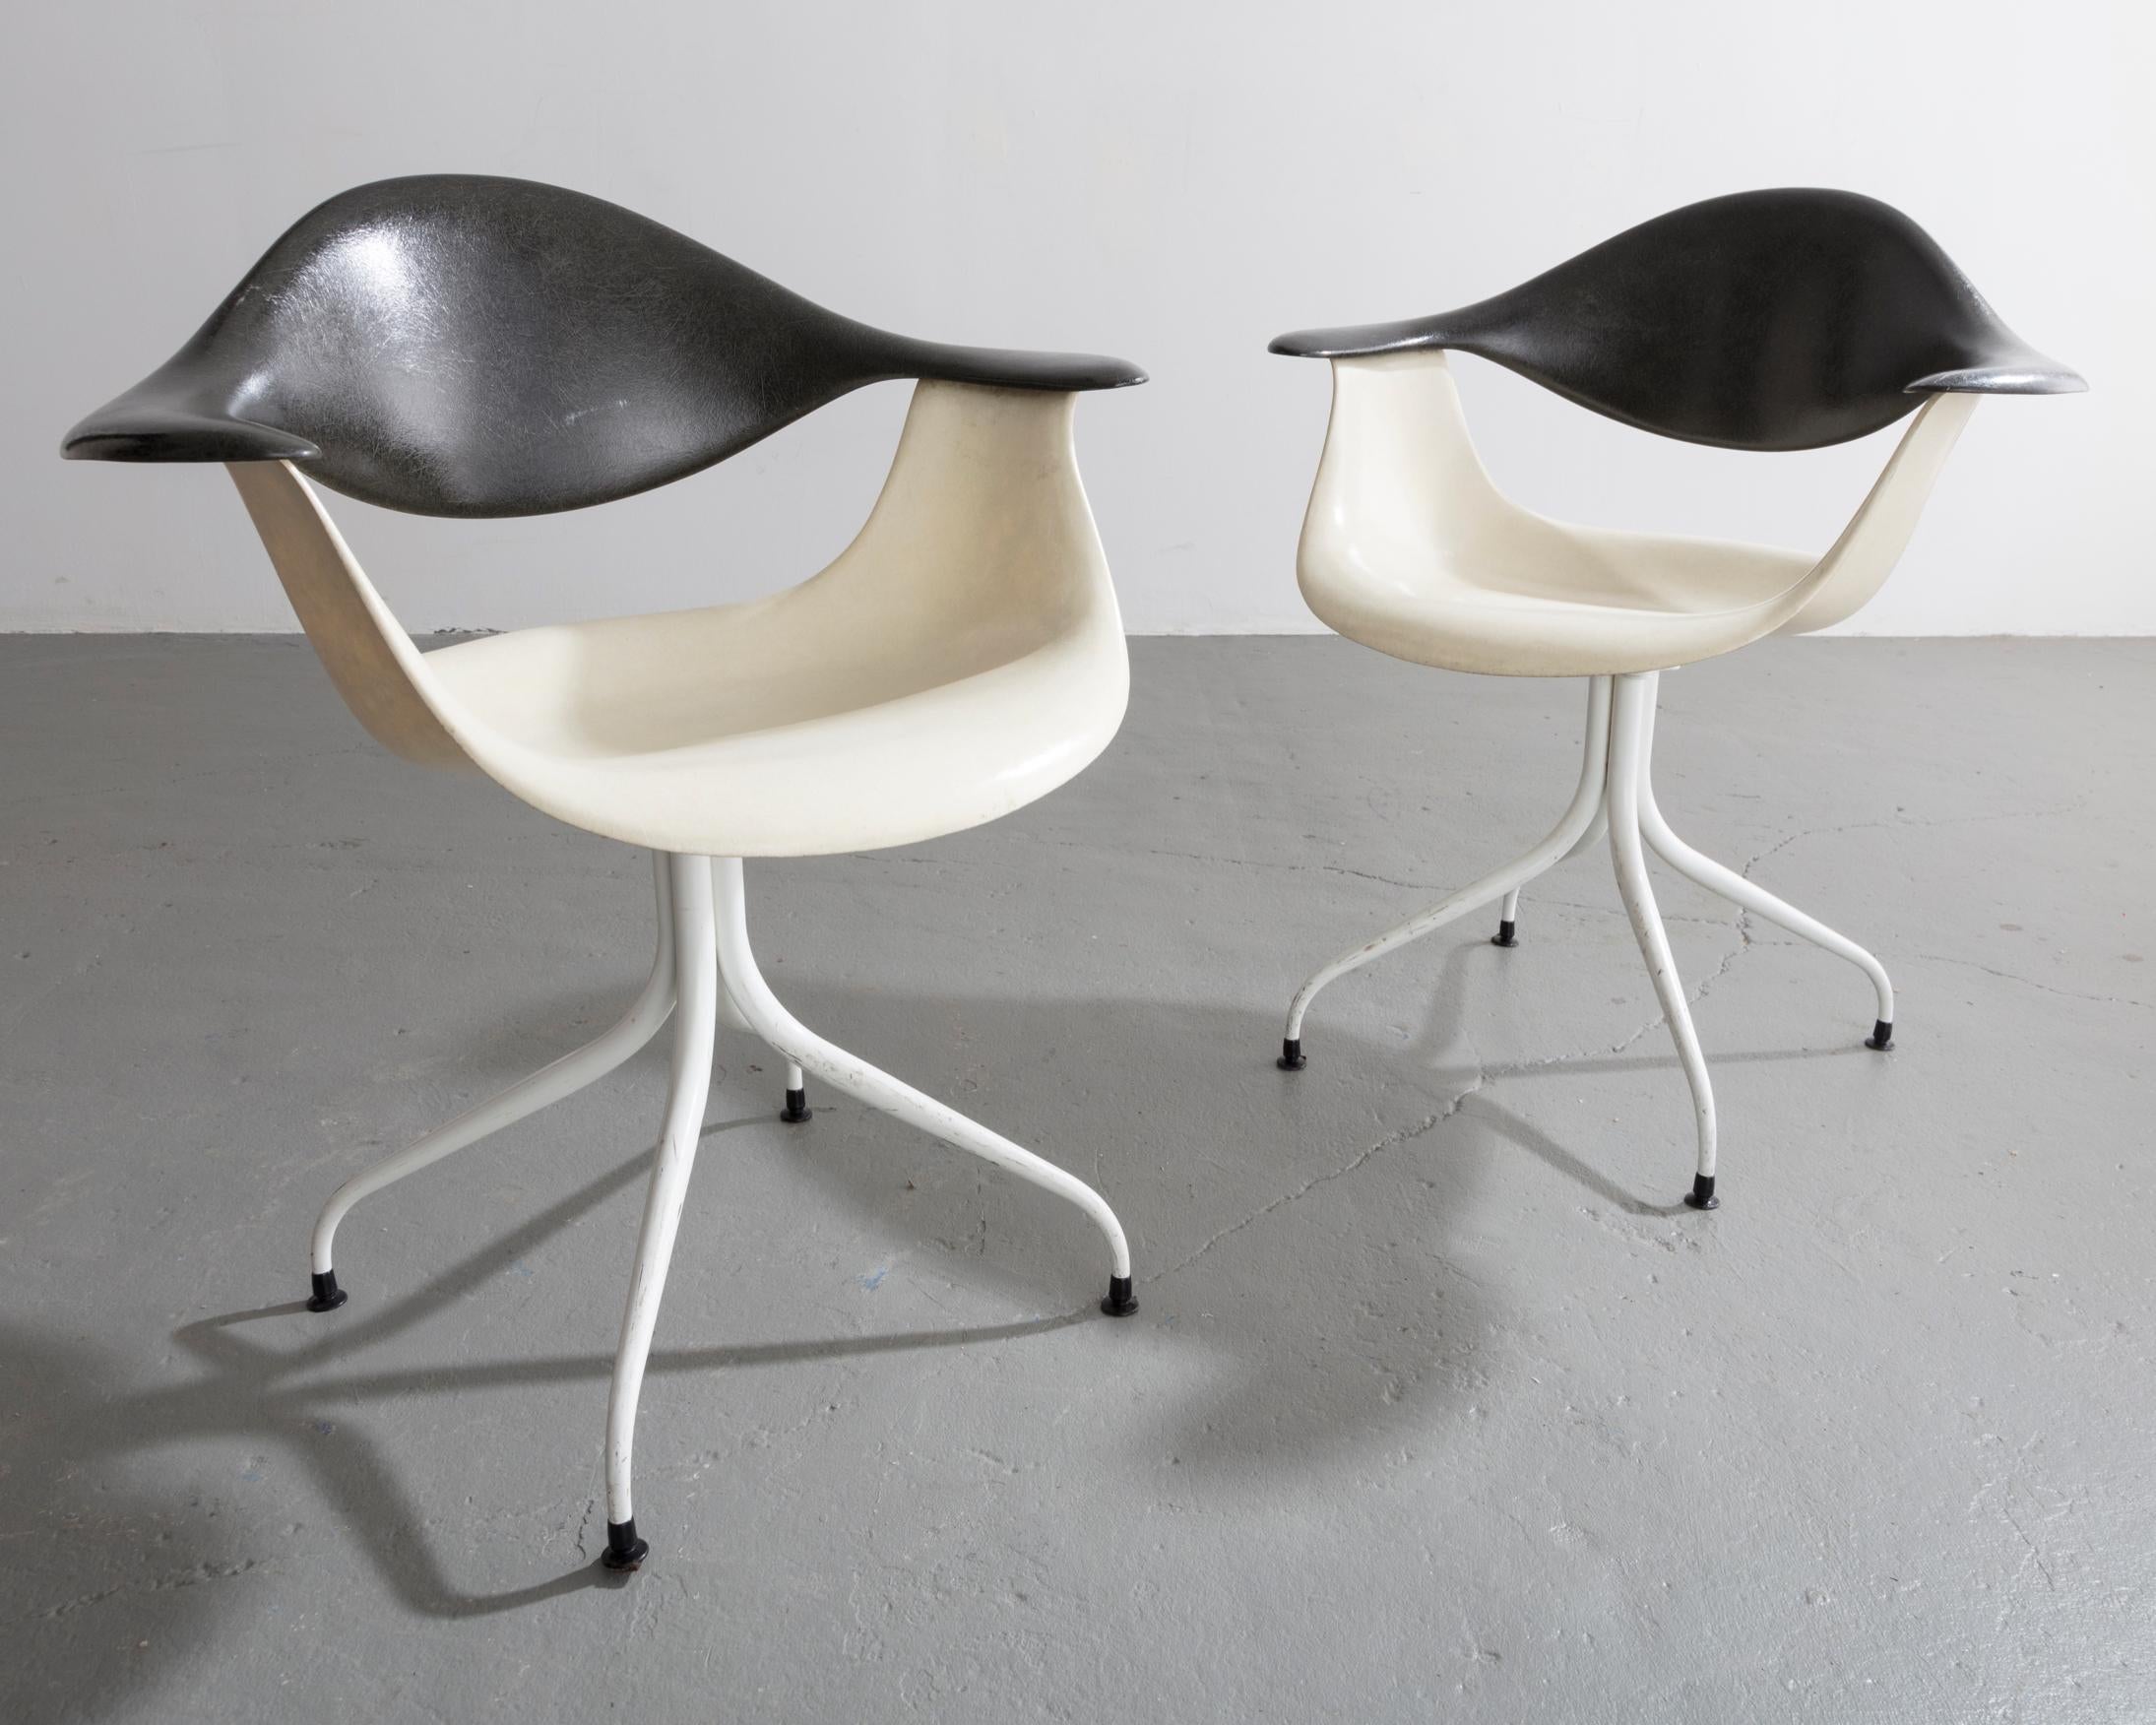 Fiberglass Swaged Leg Chair in Gray and White by Georg Nelson & Associates, 1954 For Sale